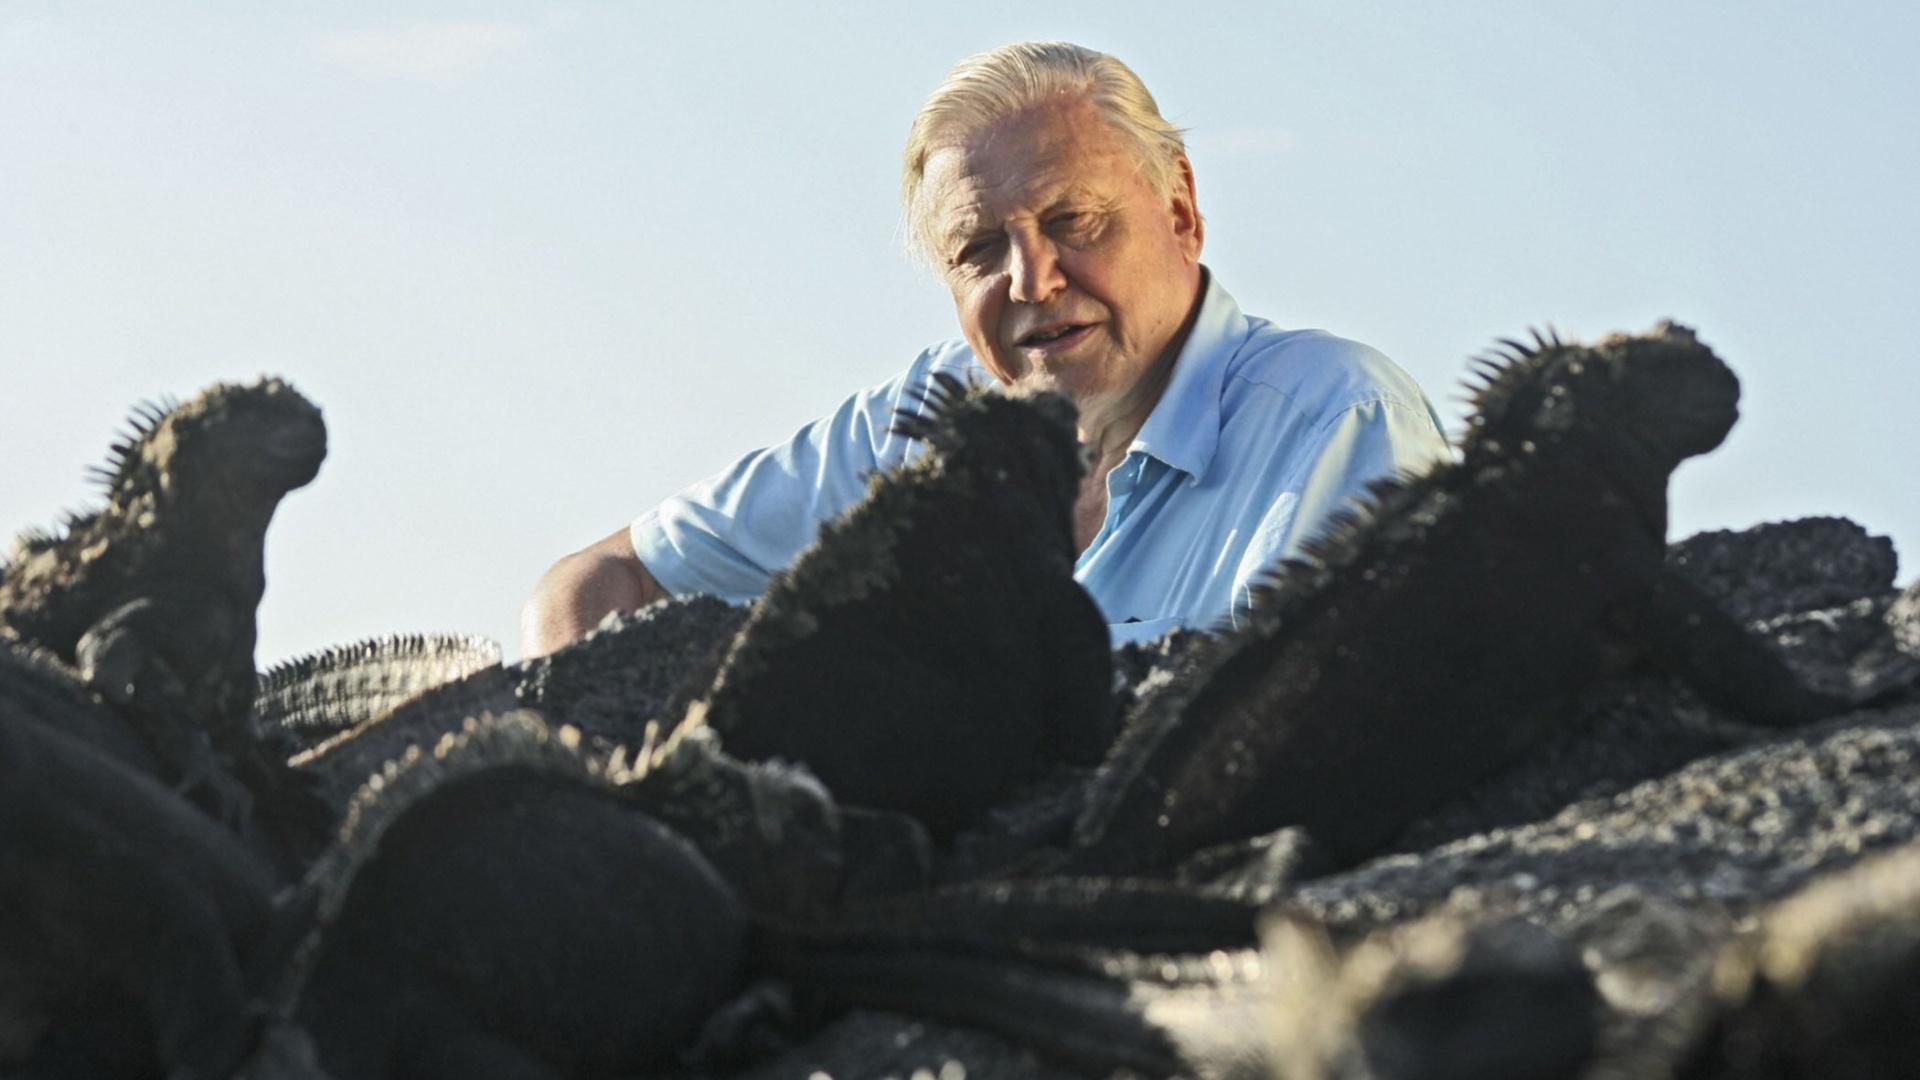 First Life with David Attenborough